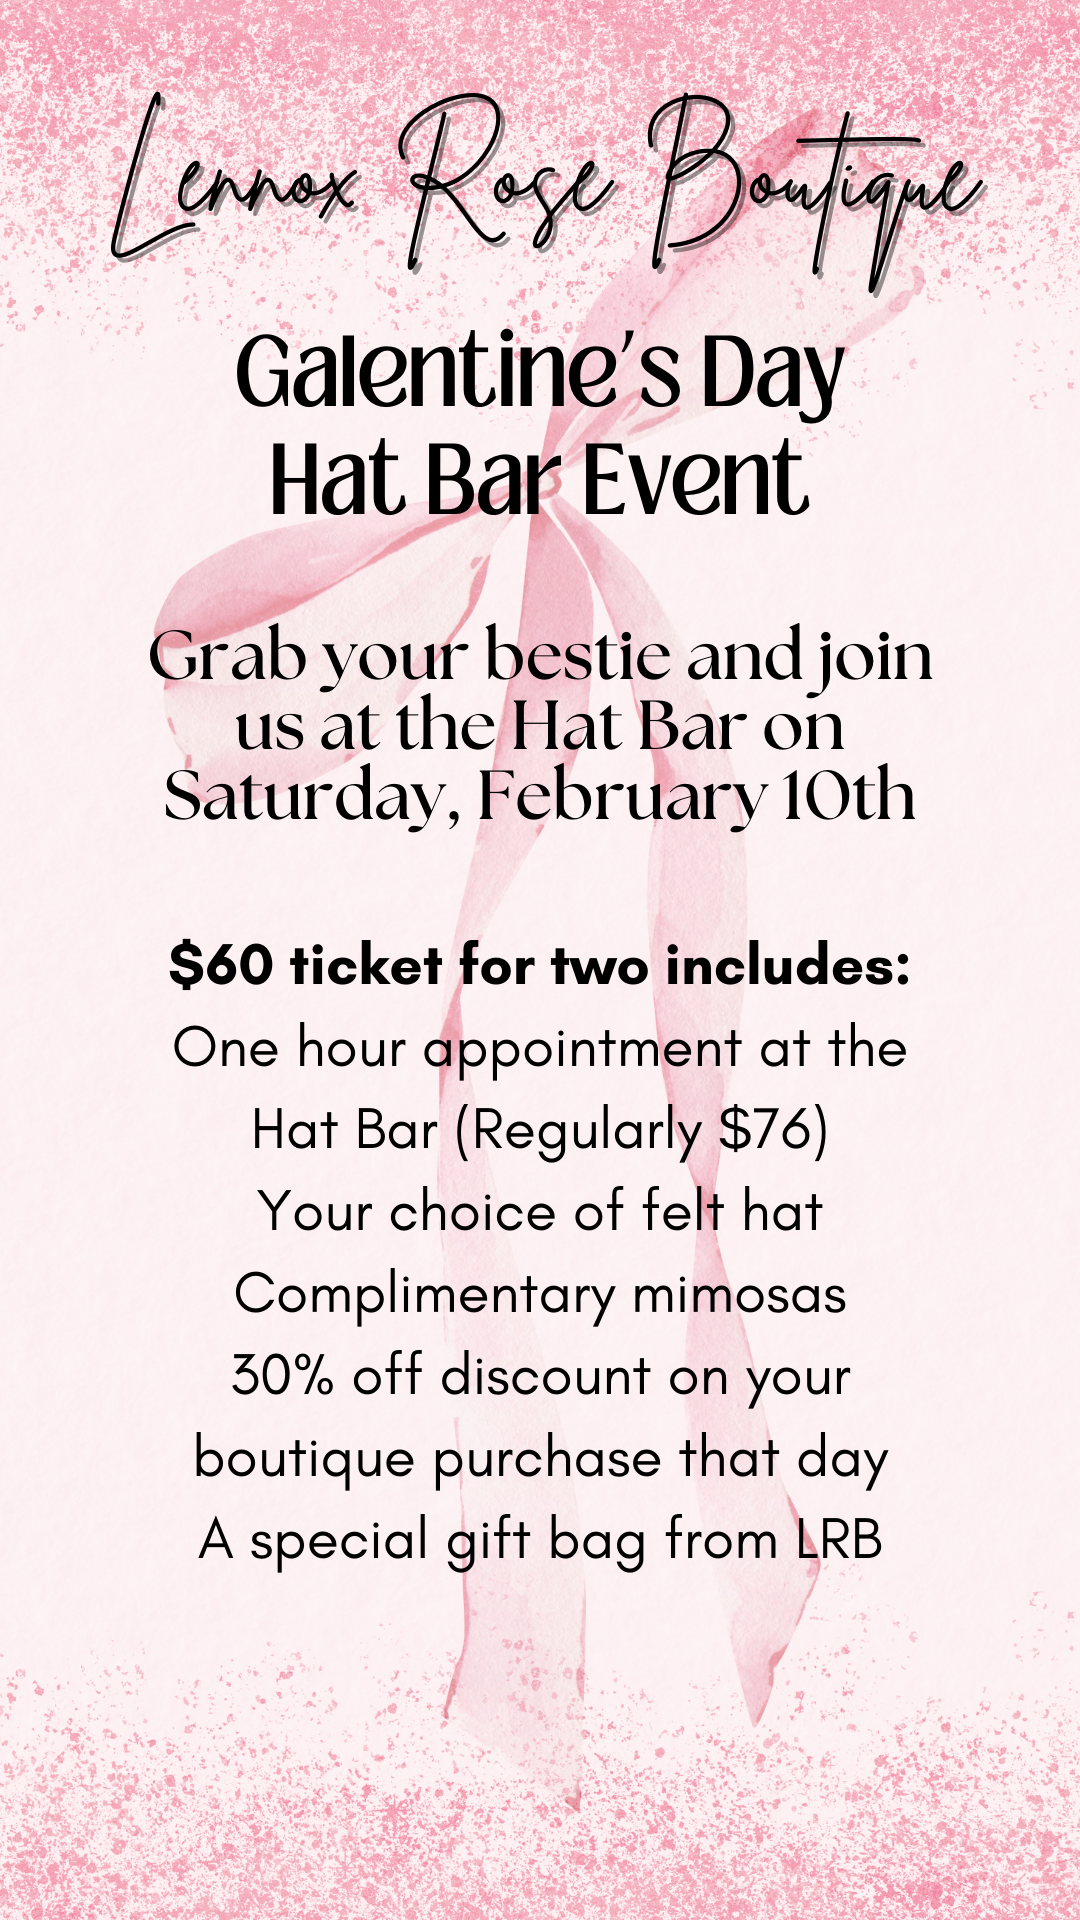 Galentine's Day Hat Bar Event - Saturday, February 10th